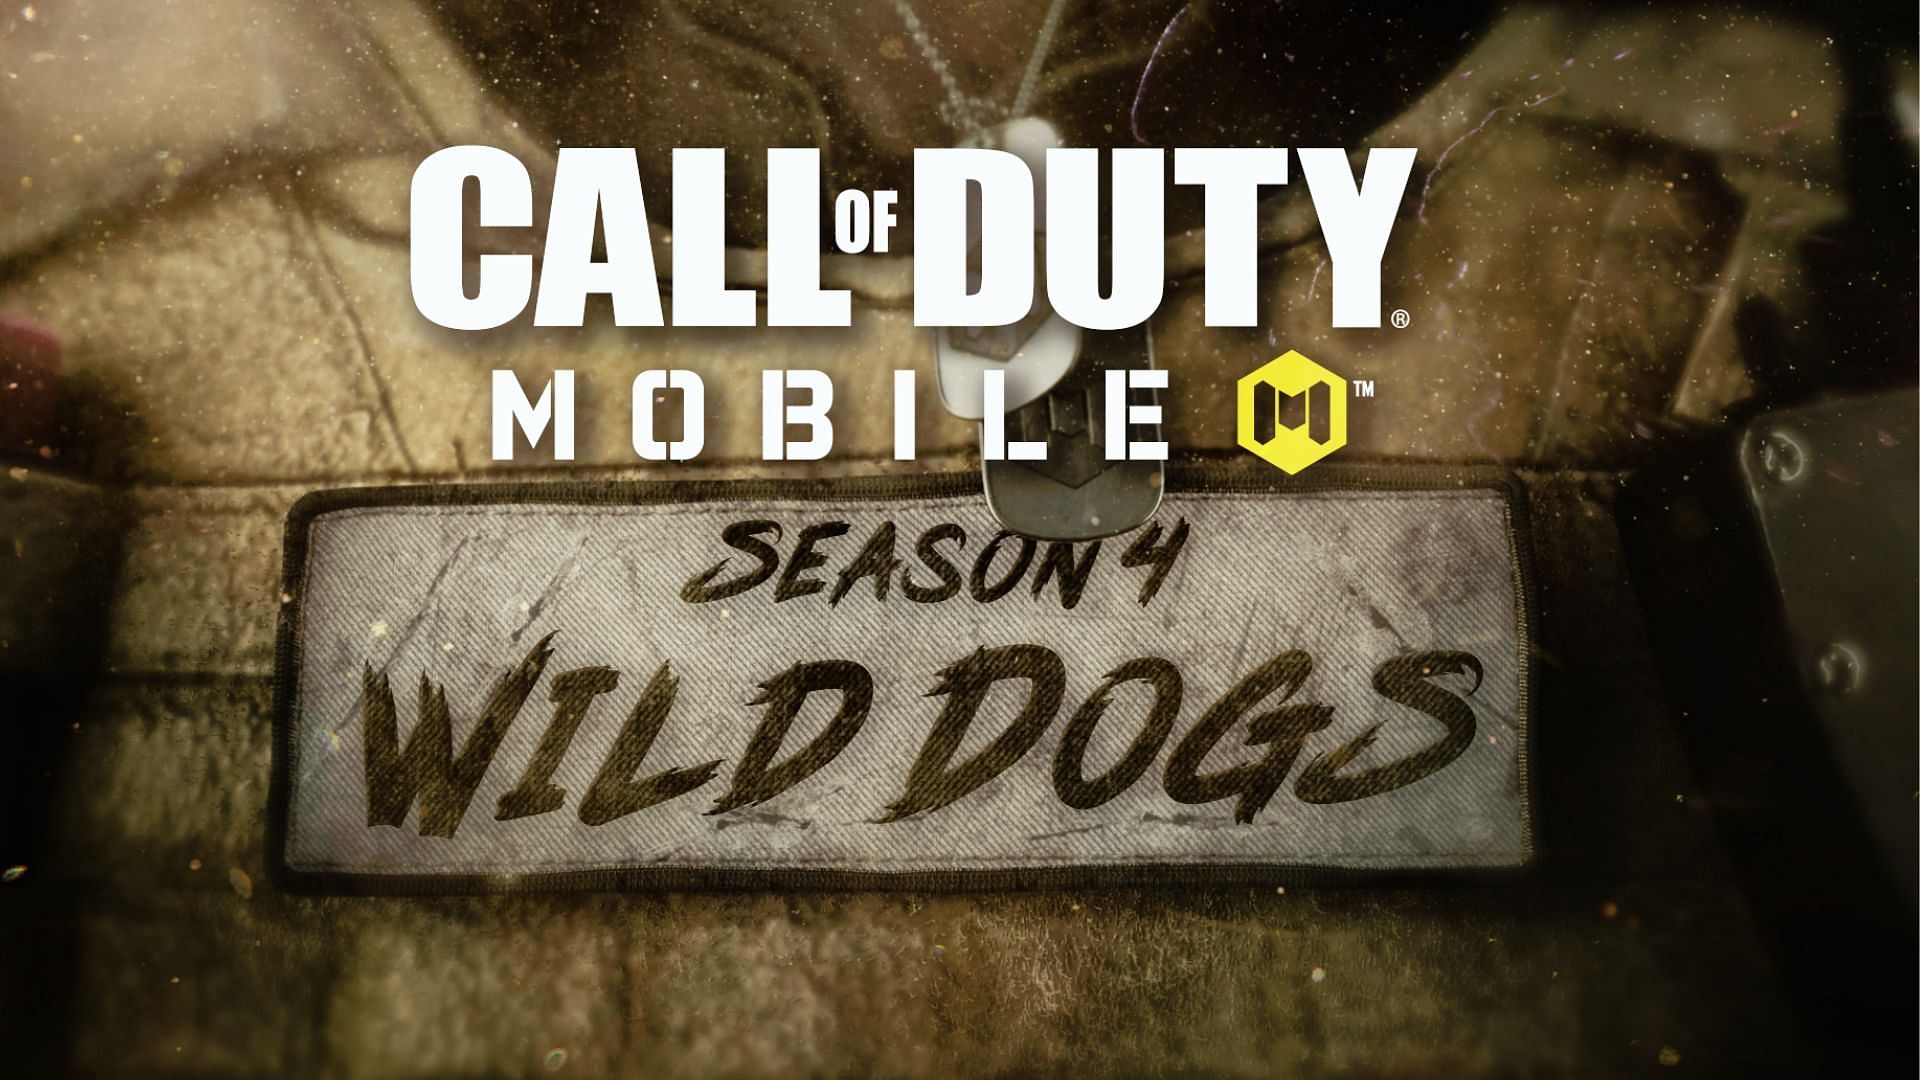 COD Mobile Season 4: Wild Dogs update is out (Image via Activision)